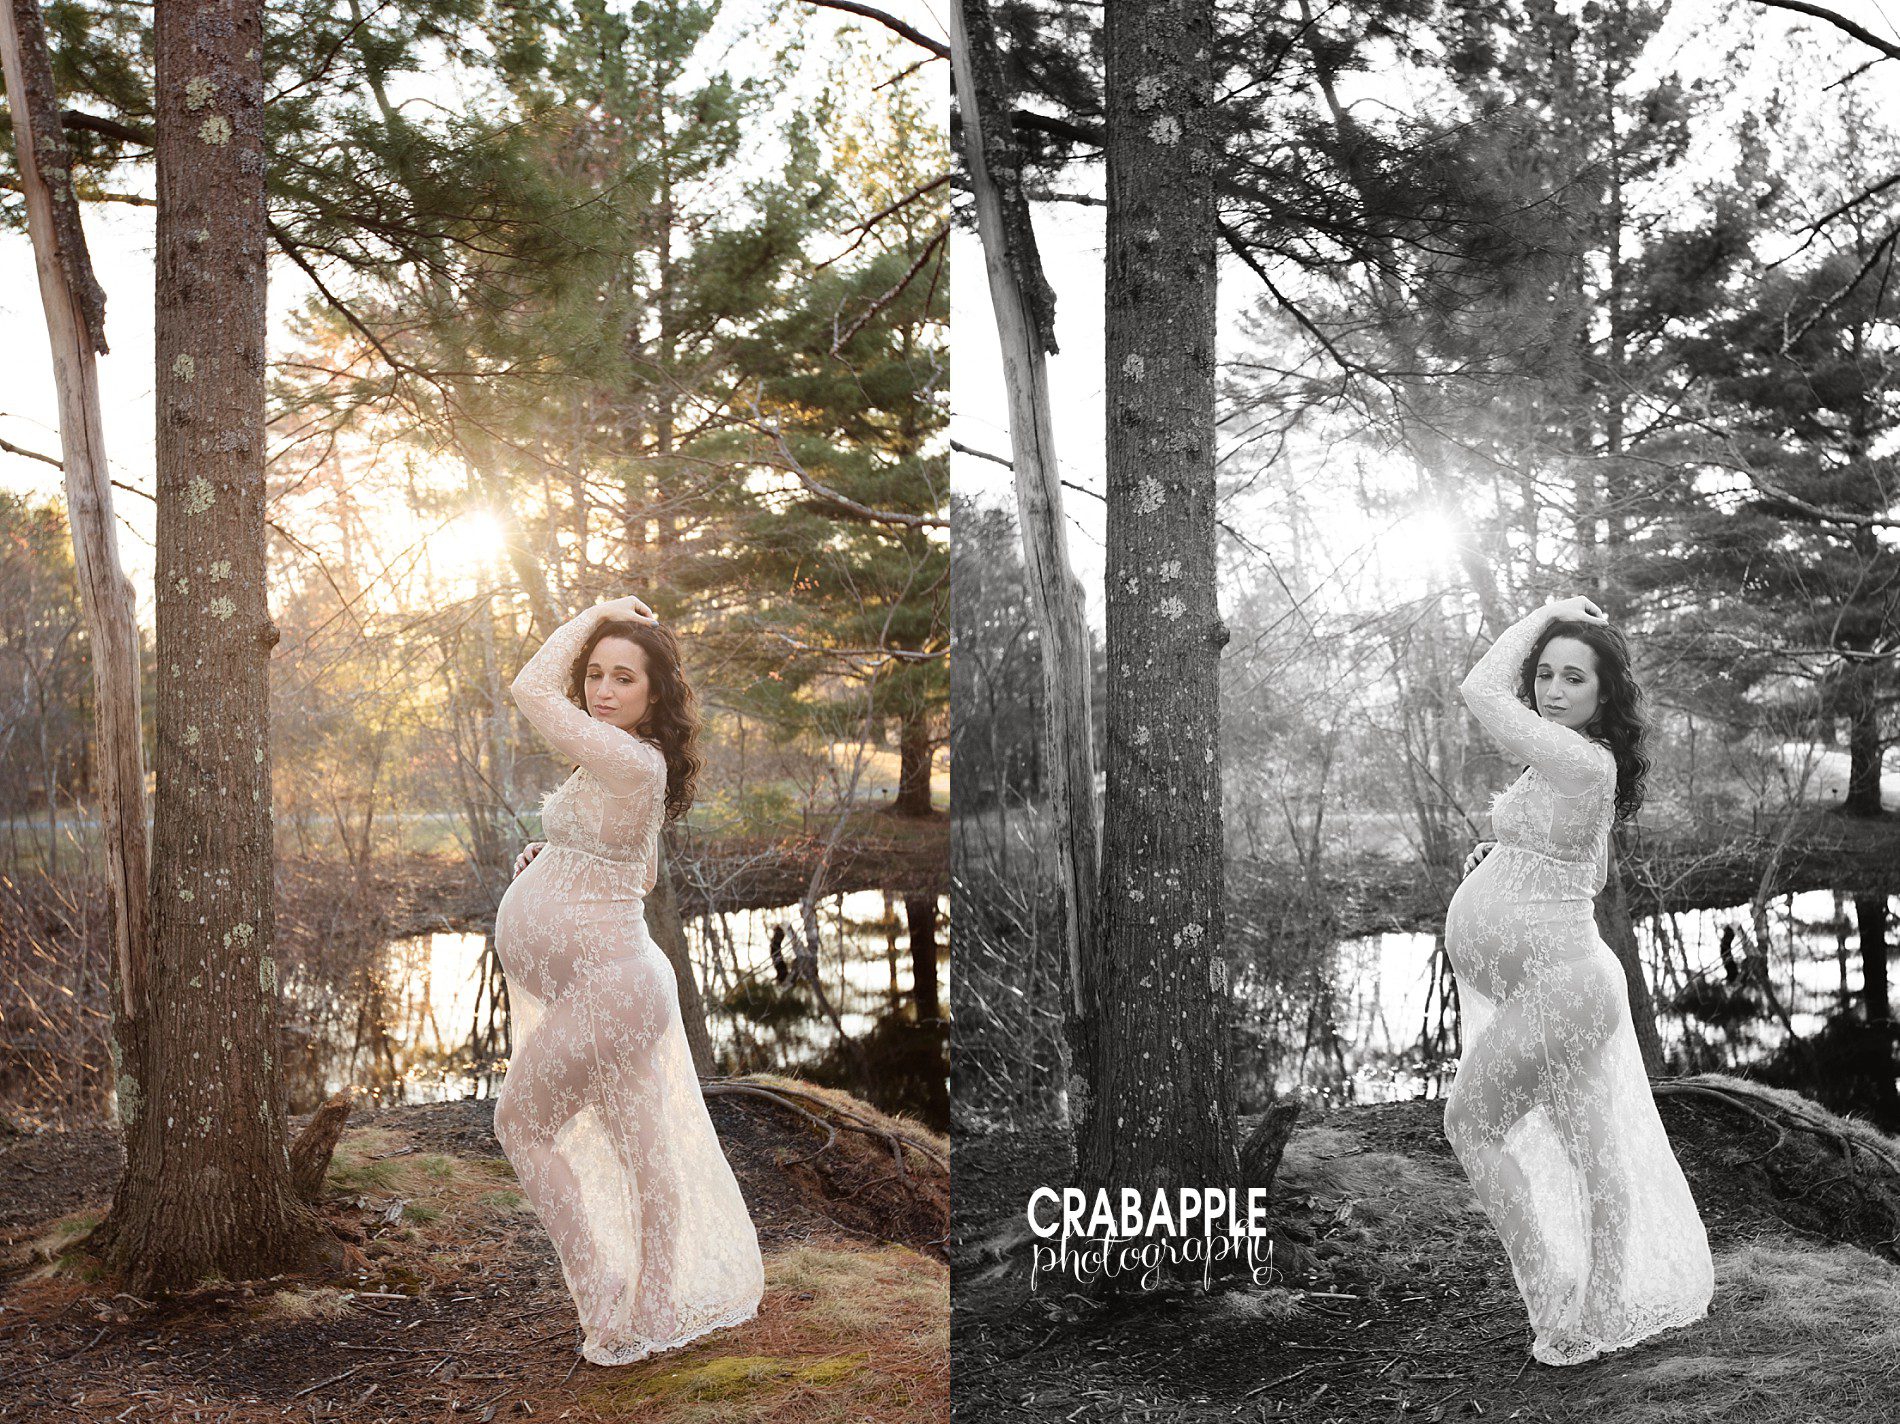 beautiful ideas for outdoor maternity photos